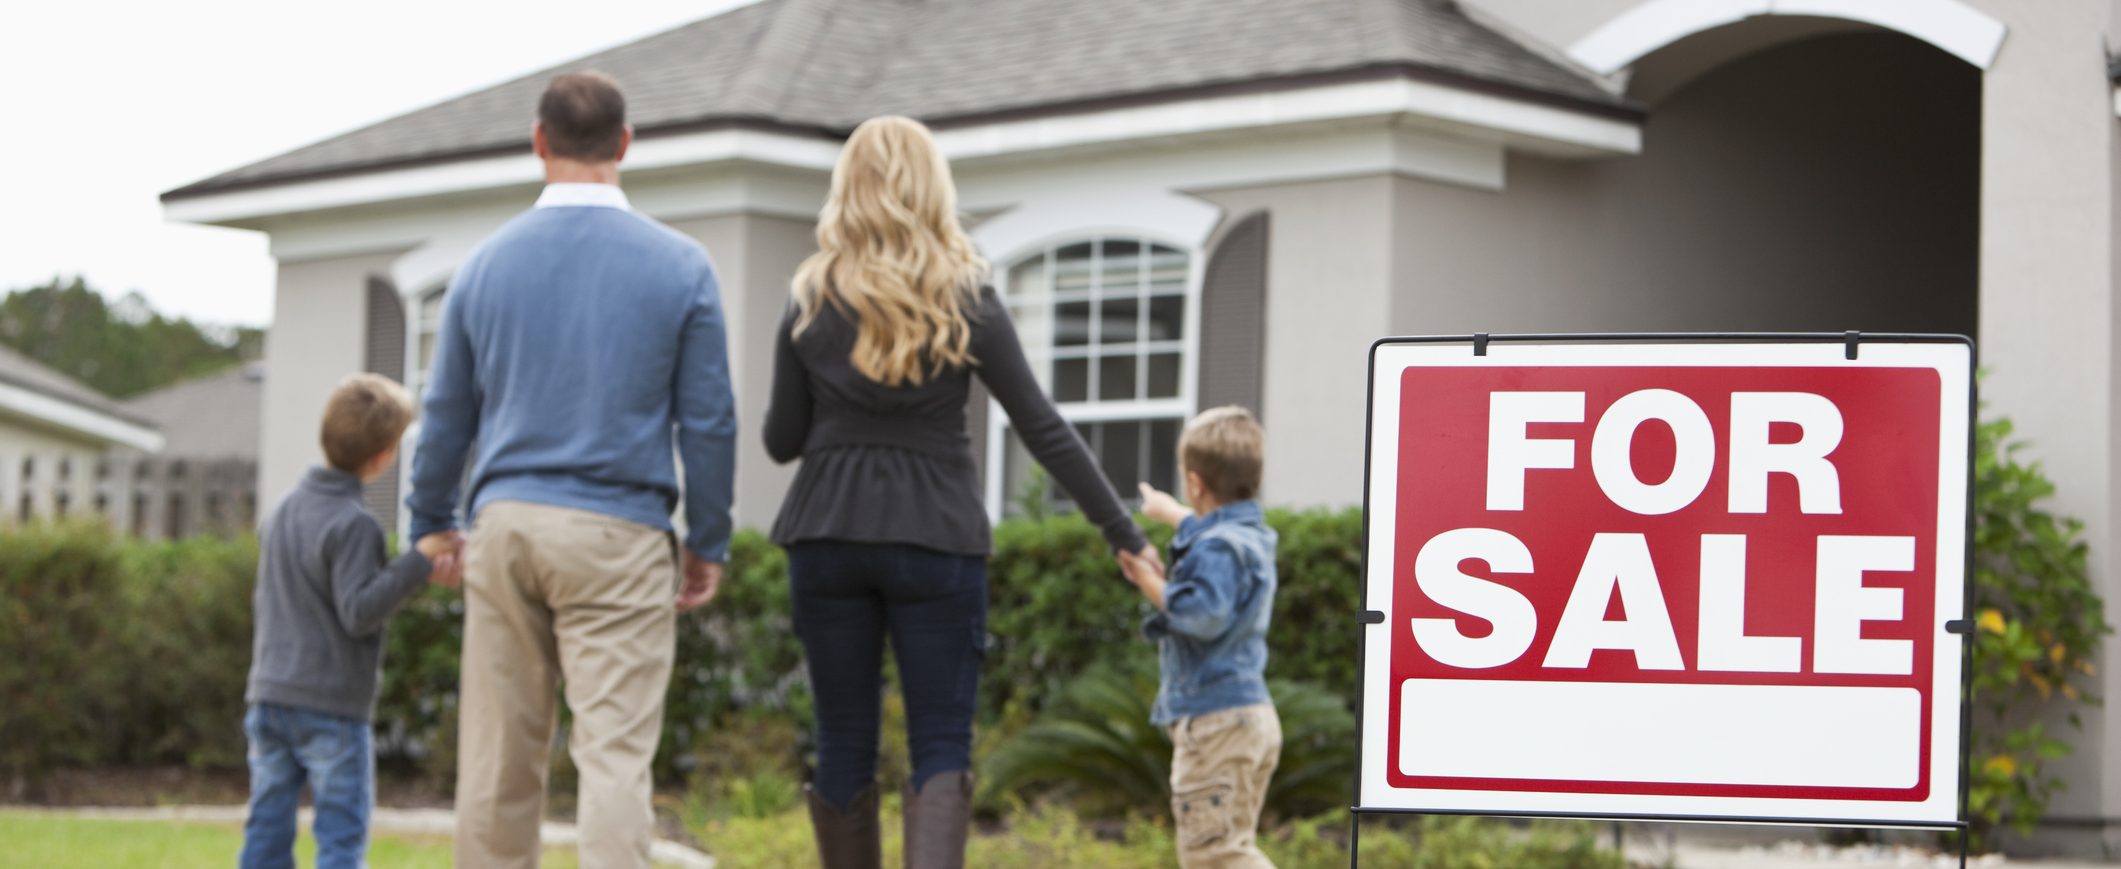 How rising interest rates affect home prices may surprise you